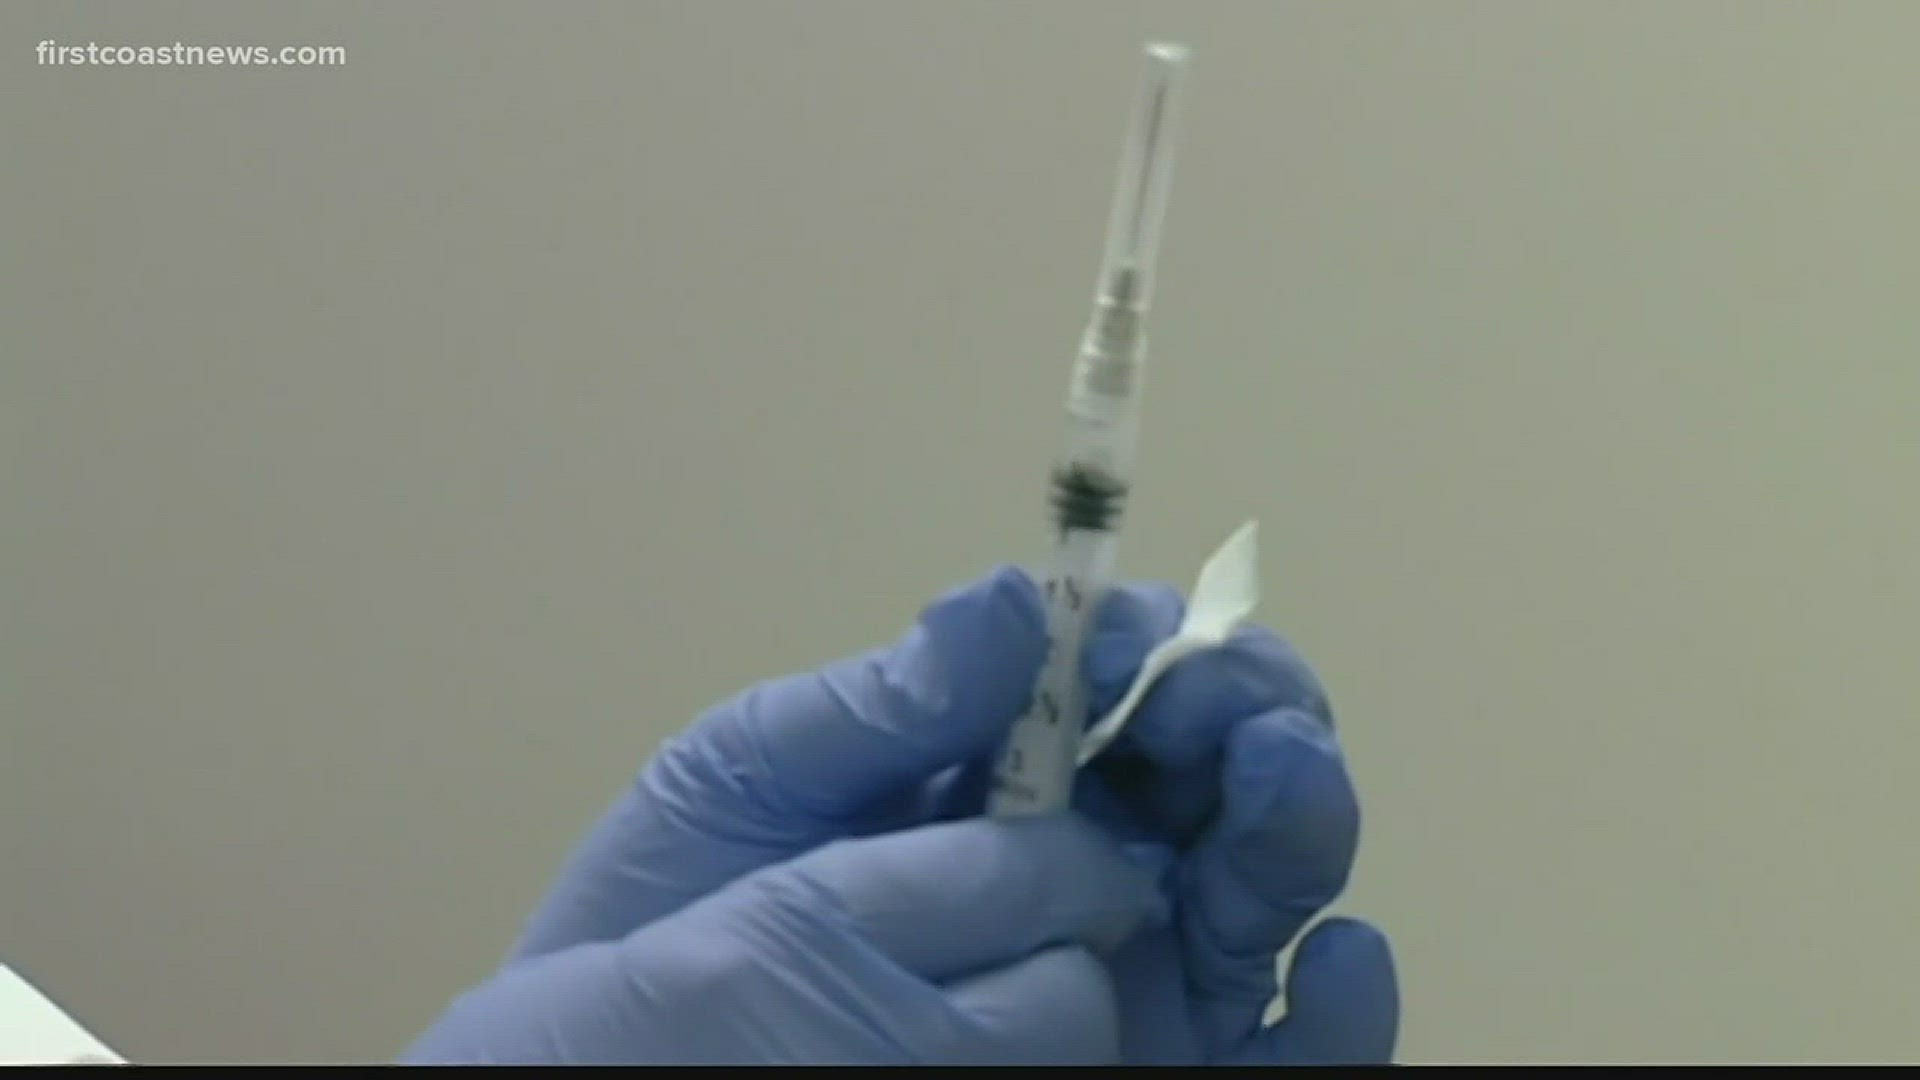 FCN's Bethany Anderson explains the current state of influenza affecting the First Coast.